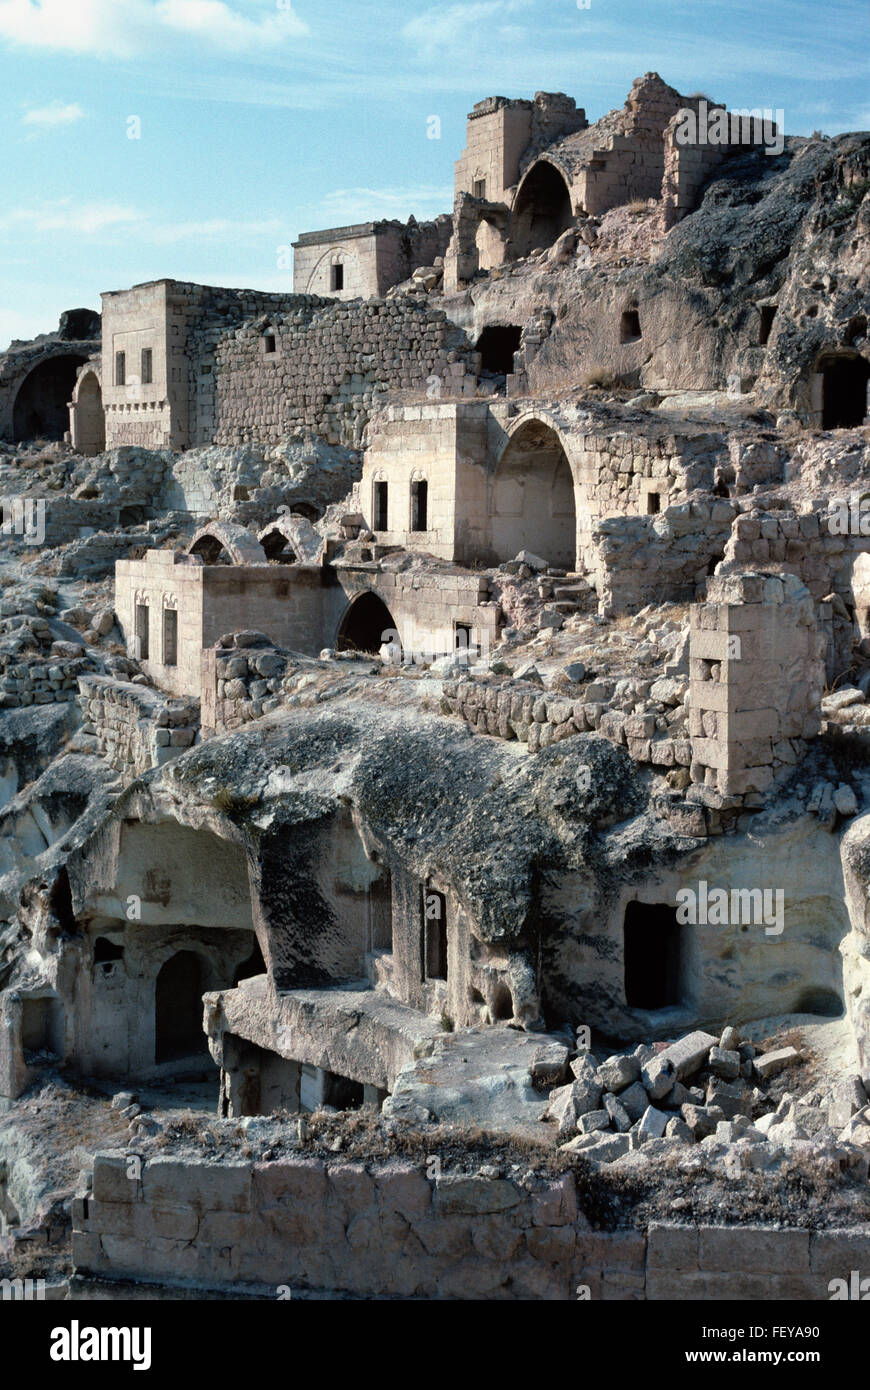 The Ruined and Abandoned Village of Cavusin, Cappadocia, Turkey. The Village was Abandoned After an Earthquake. Stock Photo